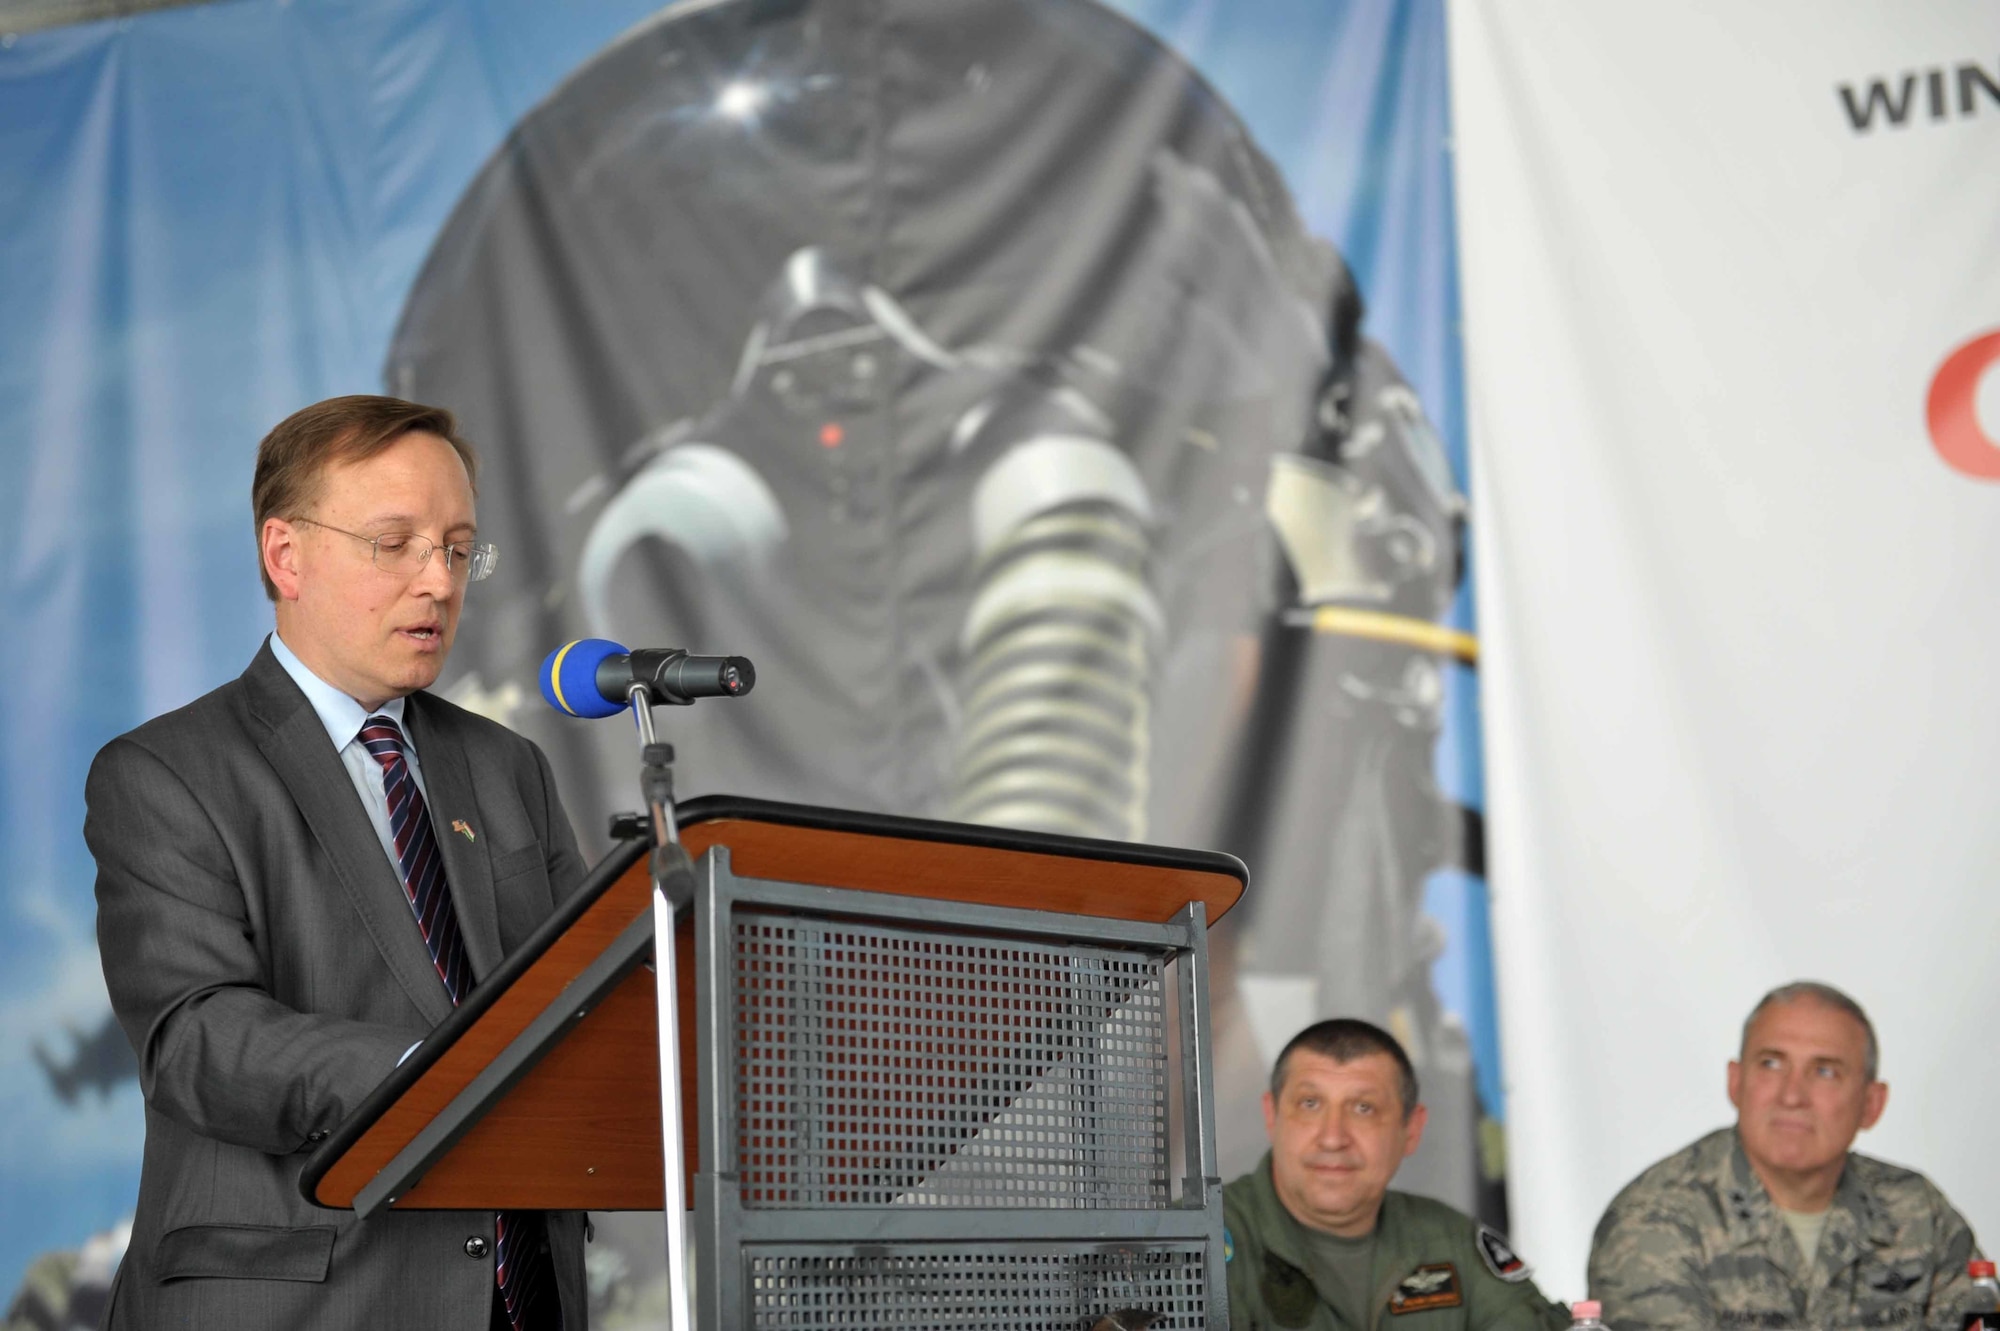 Mr. David Kostelancik, chargé d’ affaires for the U.S. Embassy in Hungary, speaks to military forces participating in Exercise Load Diffuser ’17 on June 2, at the 59th Air Base in Kecskemét Hungary. The exercise, which kicked off on Monday, May 22 and will conclude June 9, is the first Load Diffuser Exercise in Hungary in seven years and only the third of its kind in the two-decade partnership between Hungary and the Ohio National Guard.